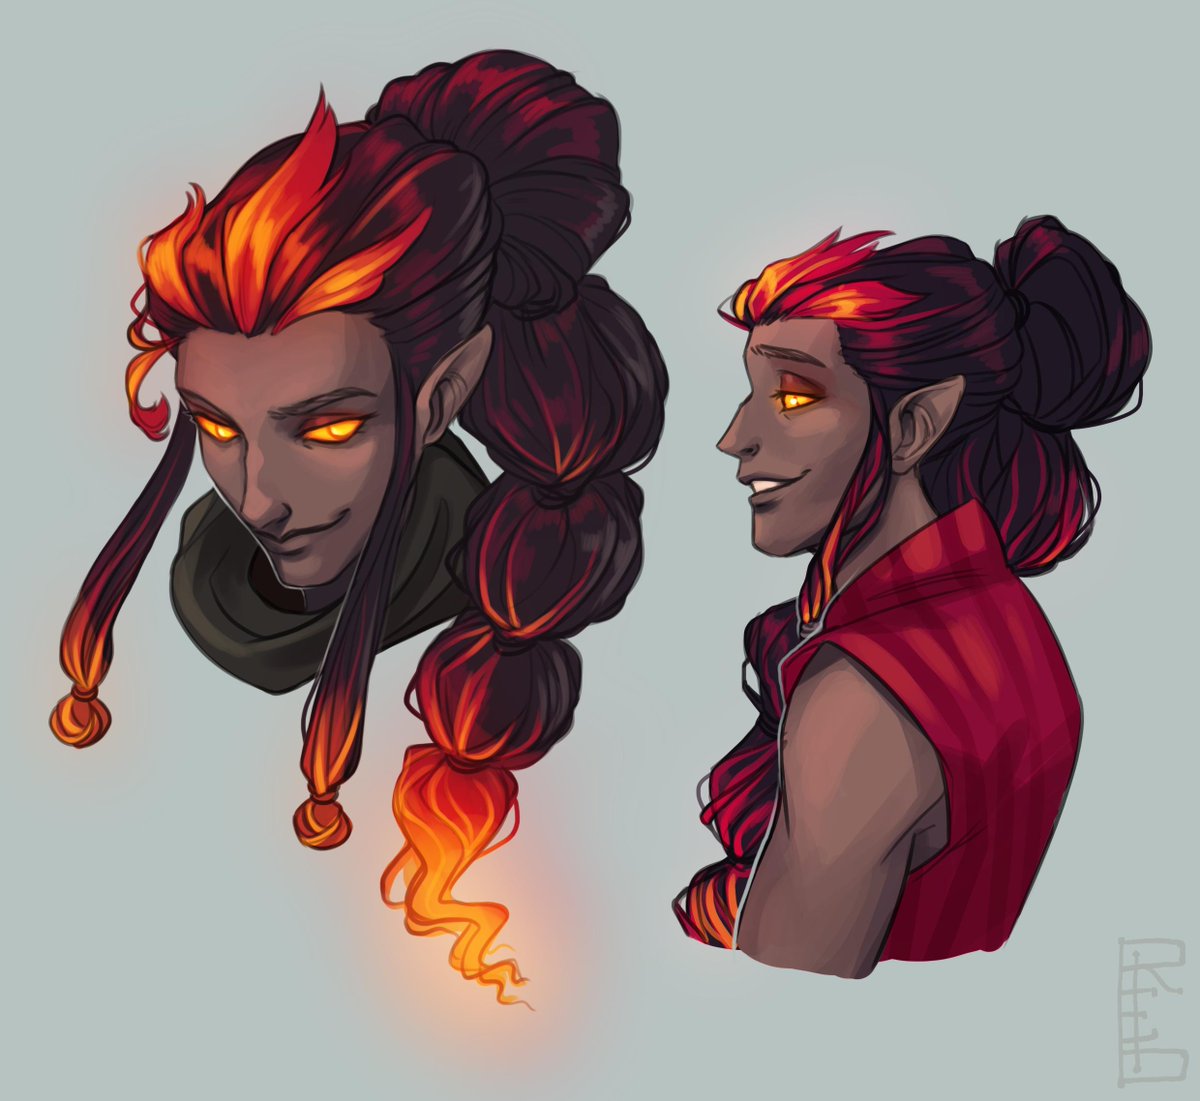 Designs for Kaeda, a fire Genasi from Mercy's past. 